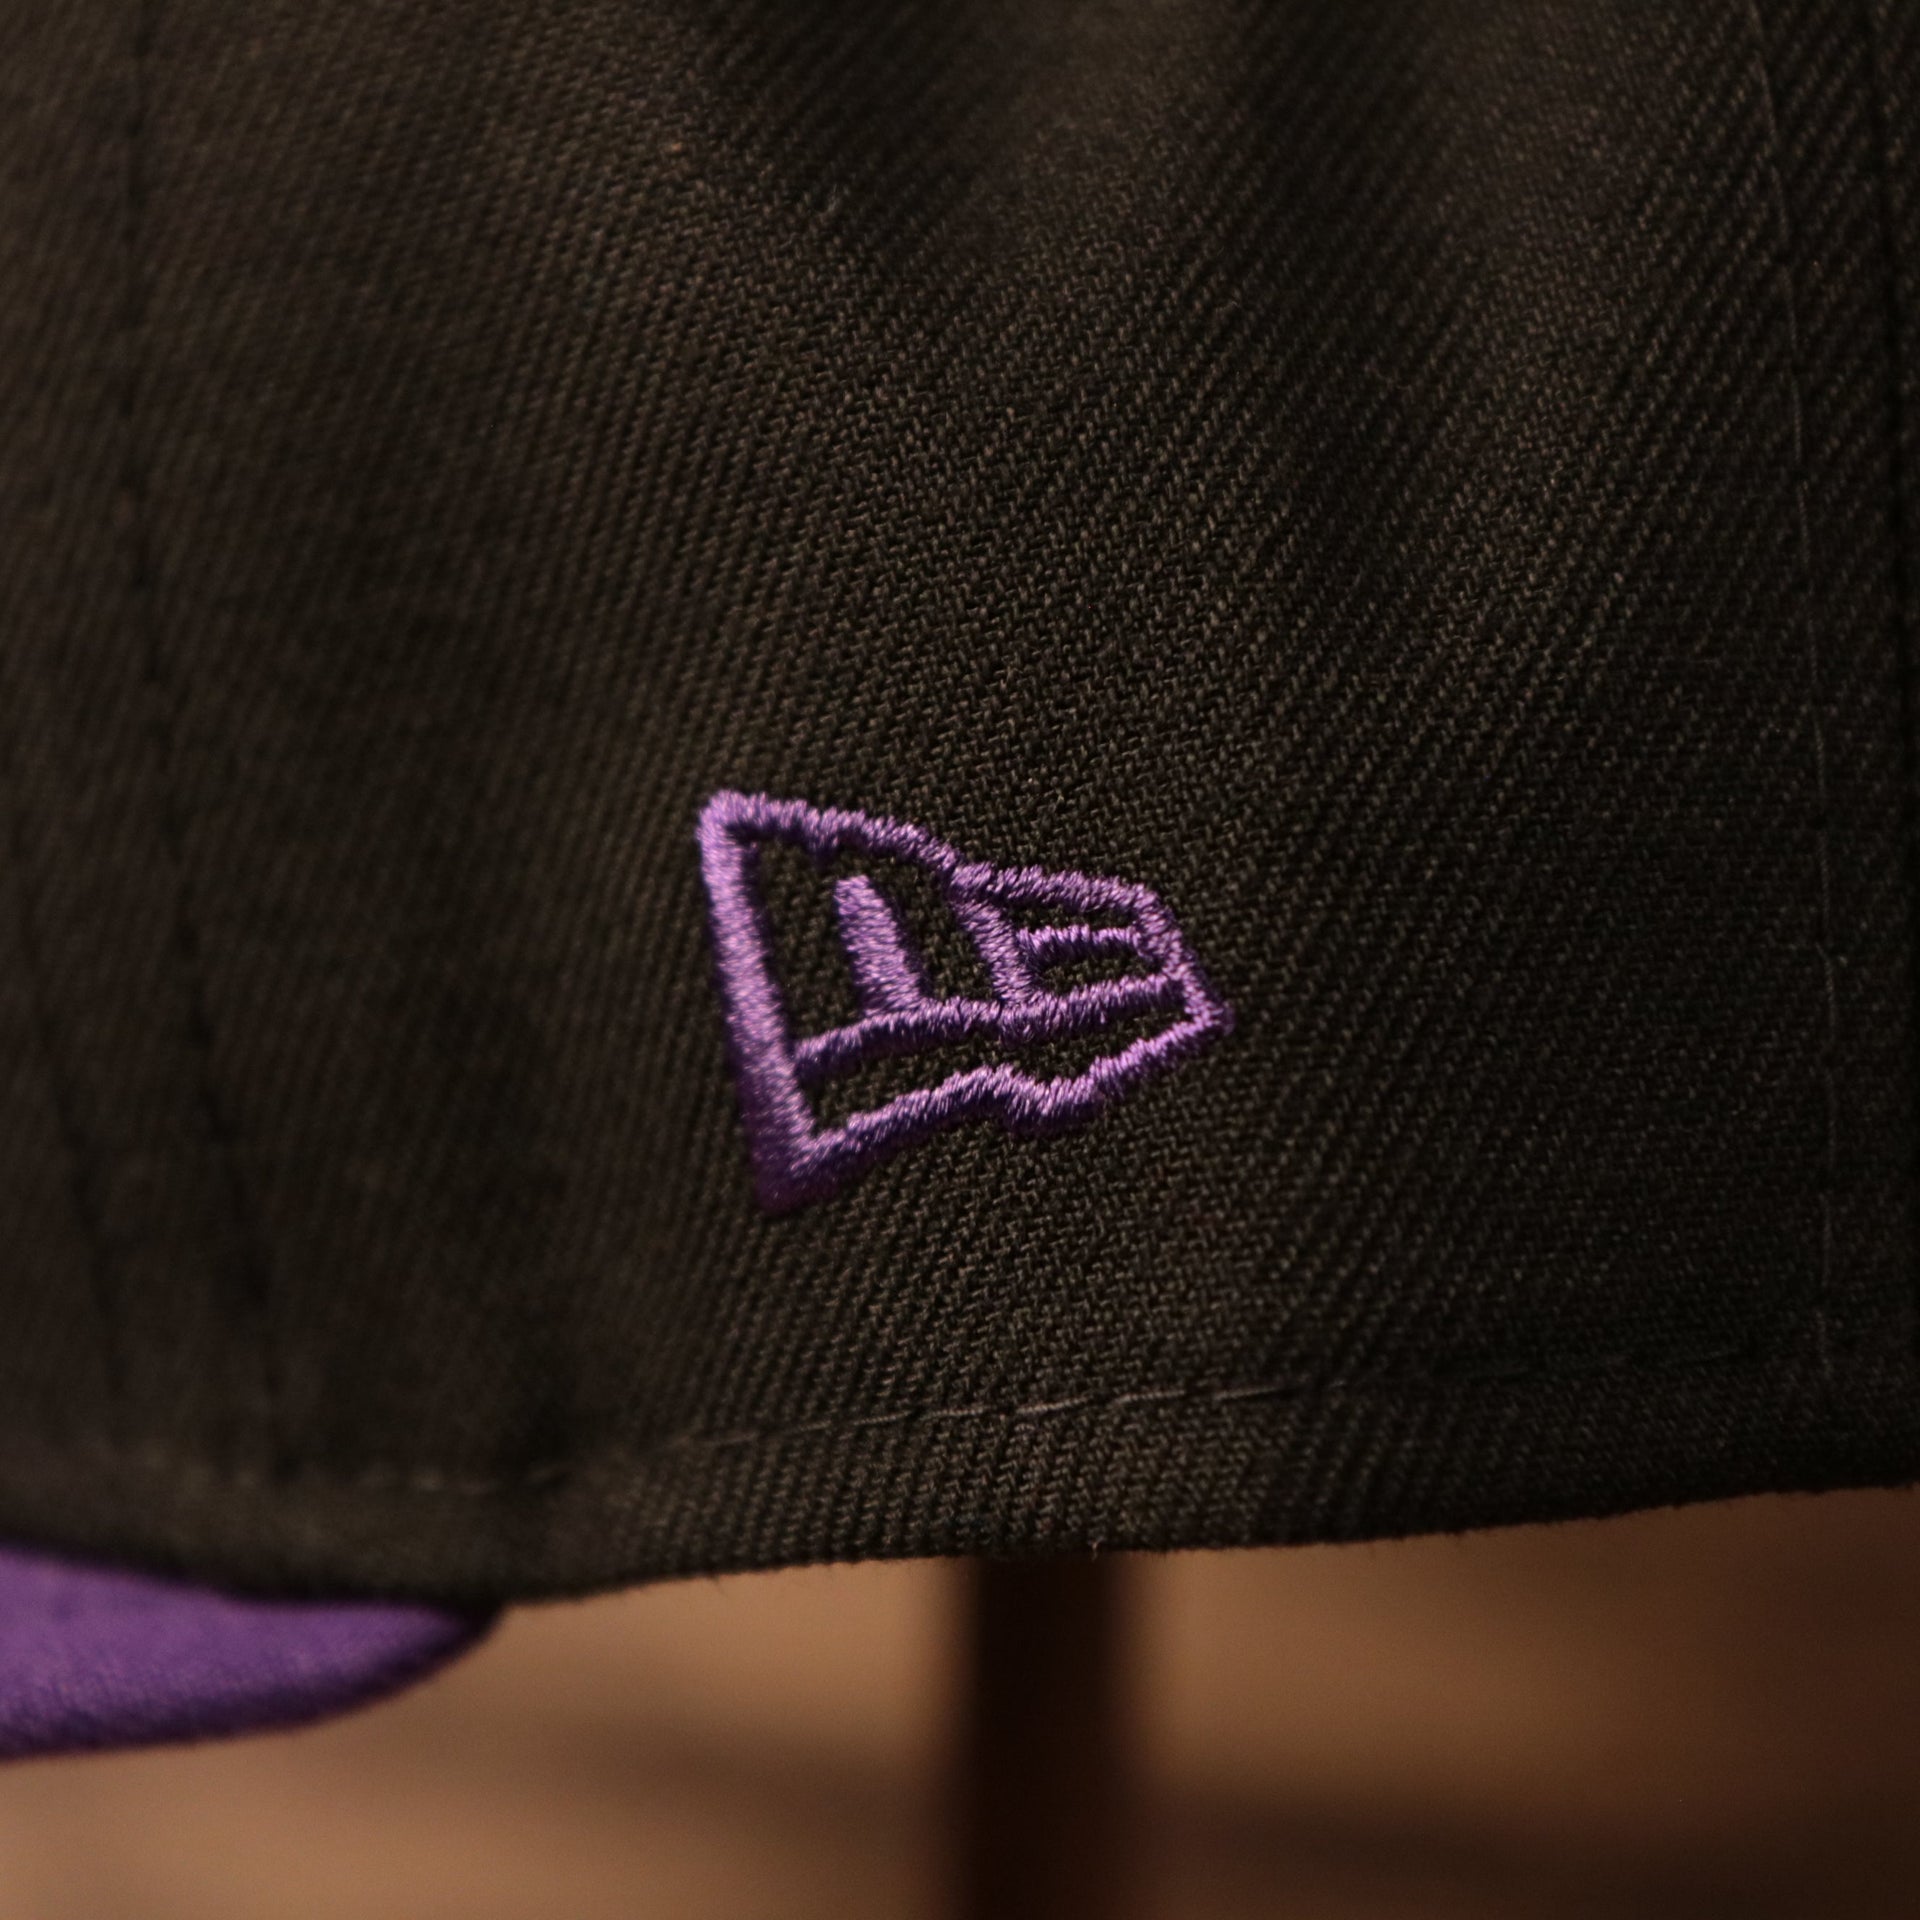 On the left side of the Lakers 2020 champions snapback hat is the logo of  New Era.